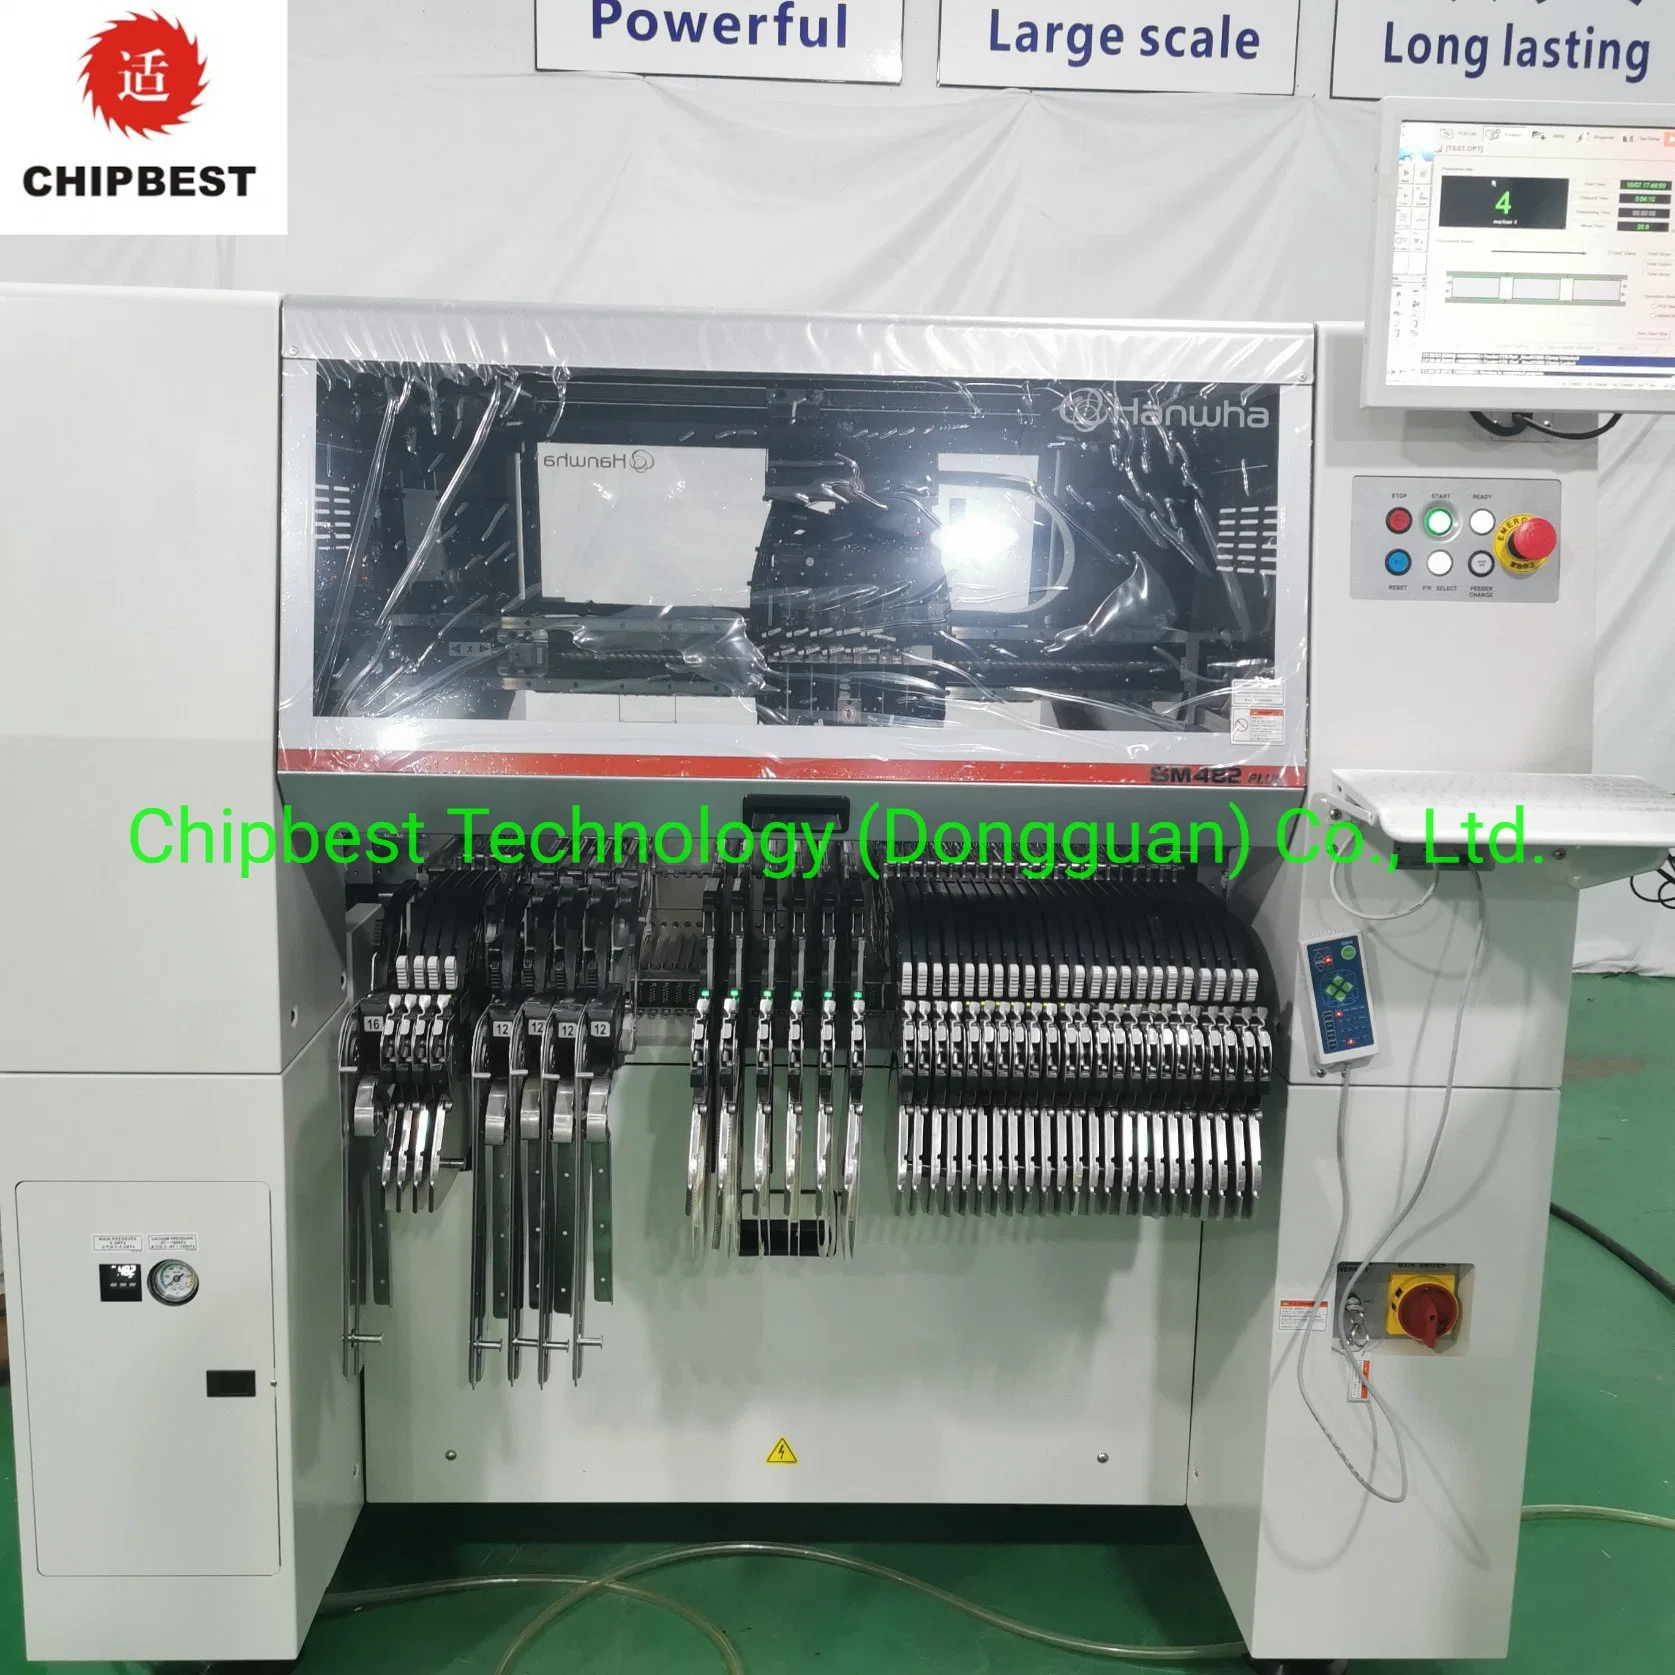 Samsung Hanwha Sm482 Plus SMT LED Lamp Manufacturing Machinery SMD Assembly Line Machine for PCBA 2023 Fully Automatic Screen Pick and Place PCB